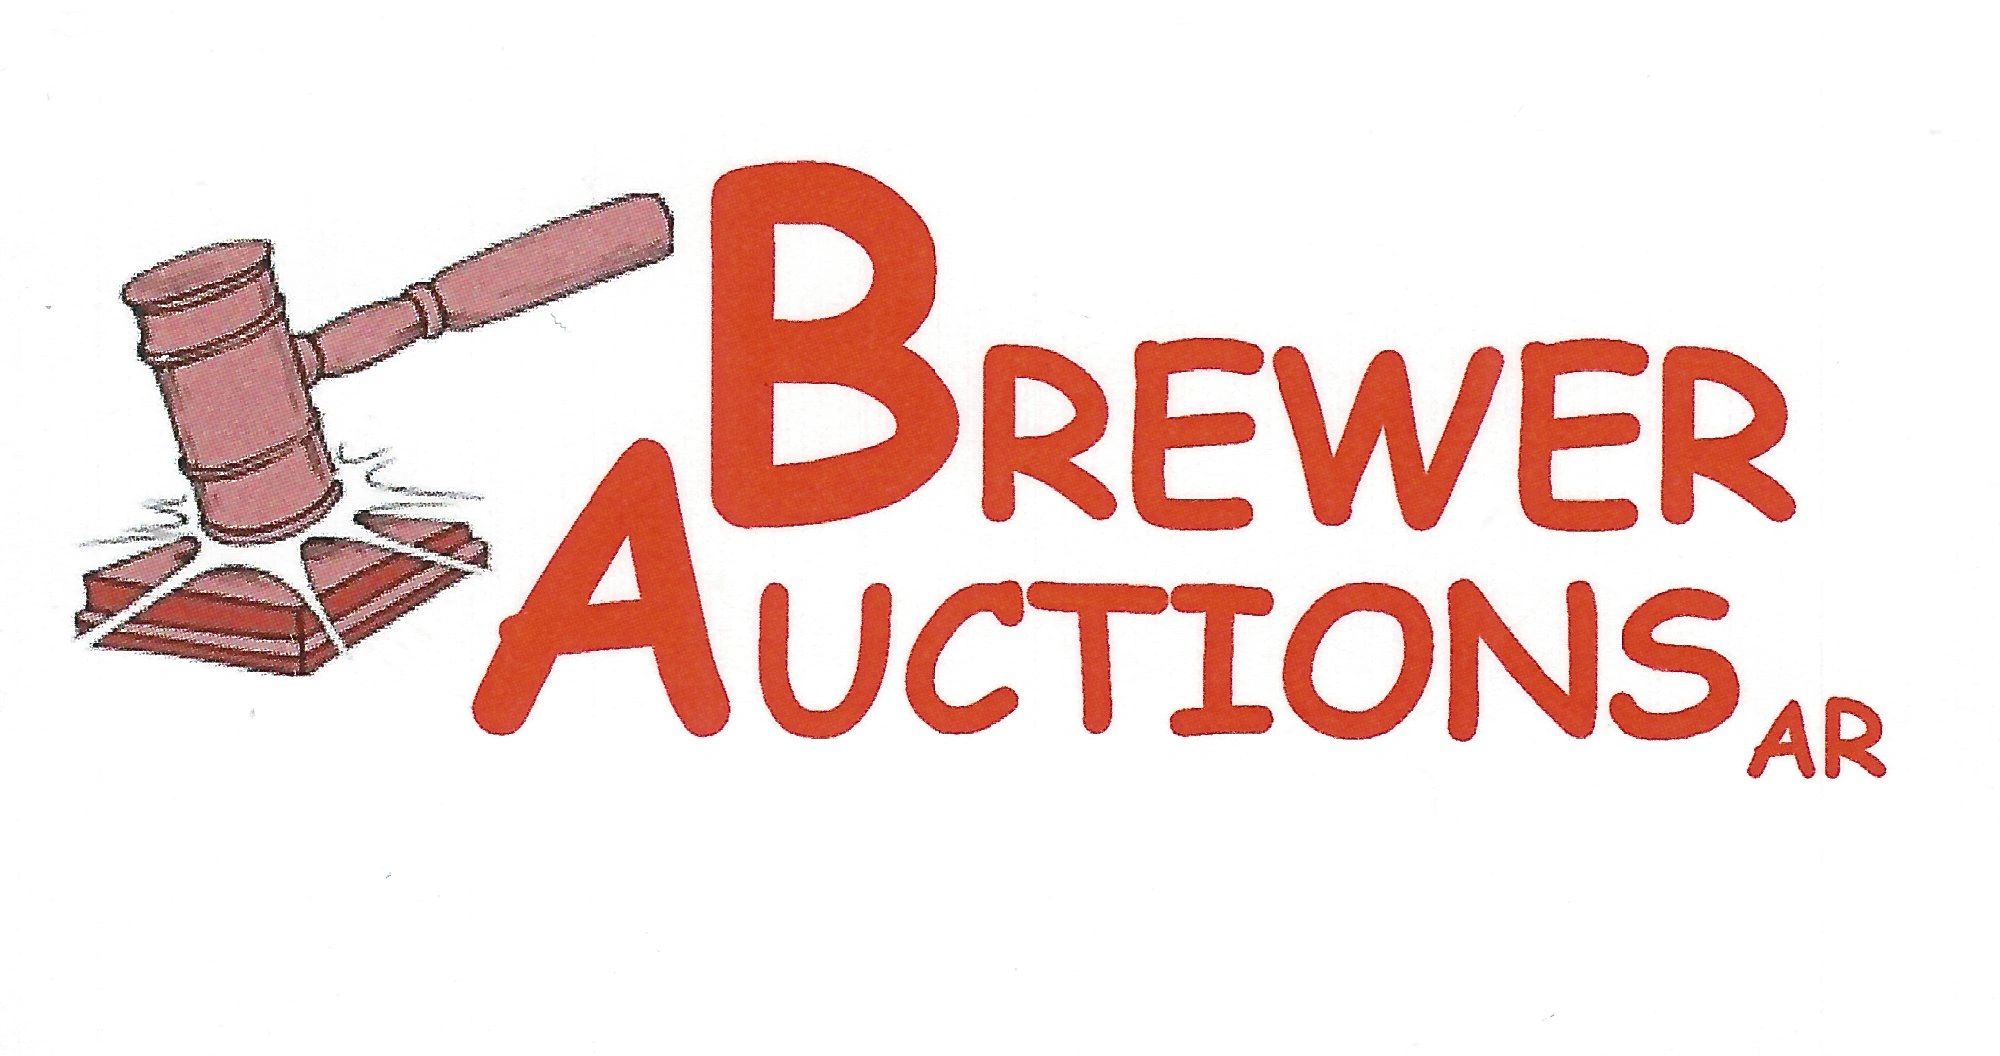 The official auction site of Brewers Auctions